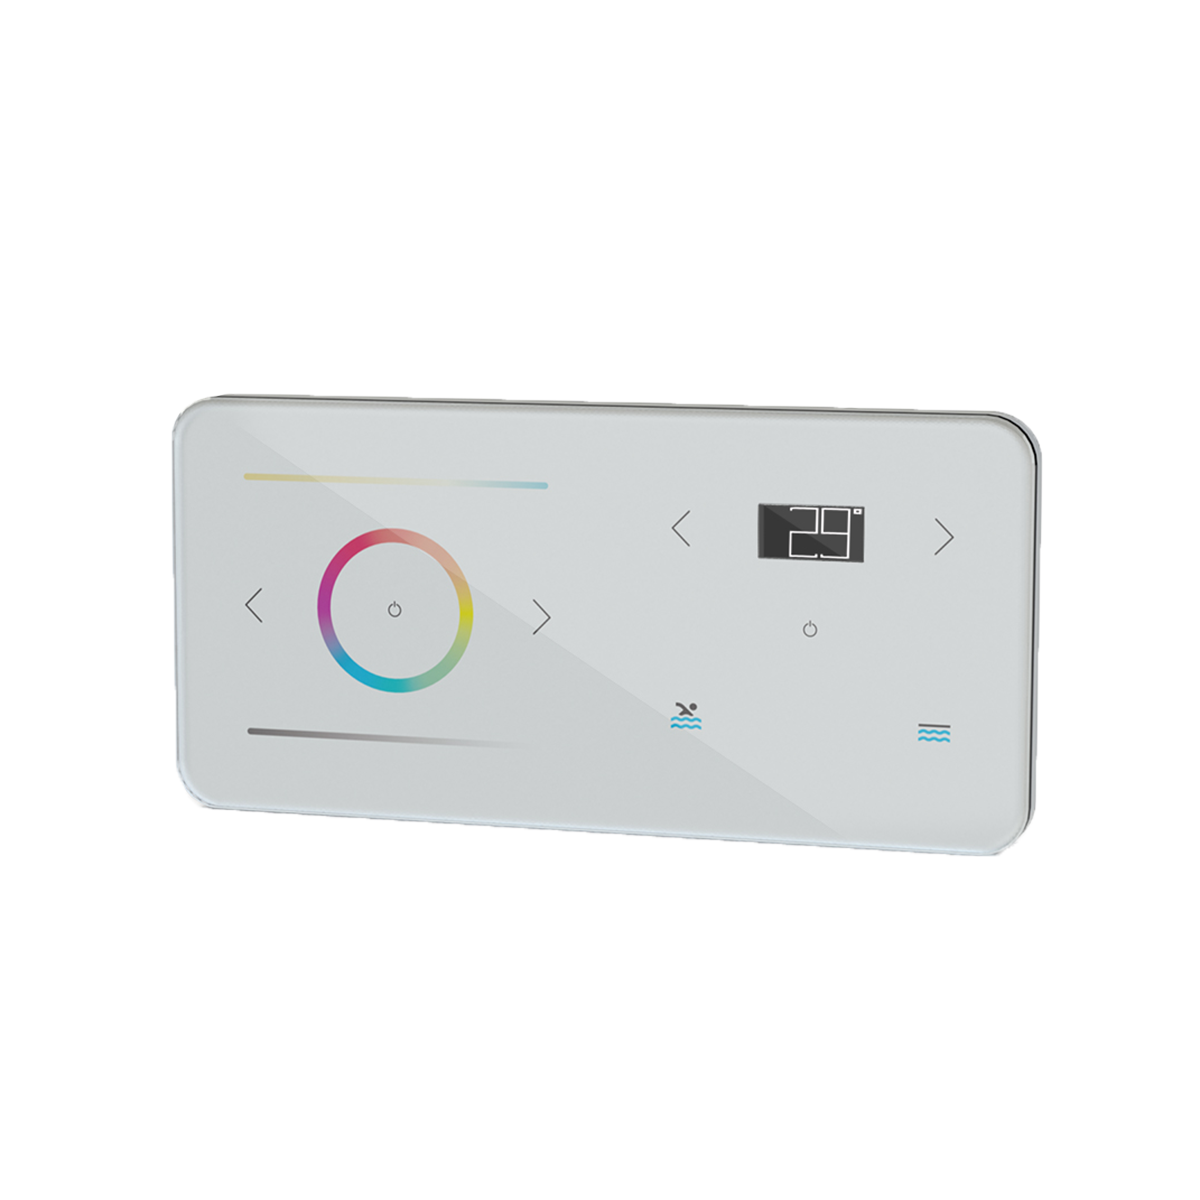 LINK Touch remote control RGB for VISION lamps, full colour
 LINK Touch remote control RGB for VISION lamps, full colour
